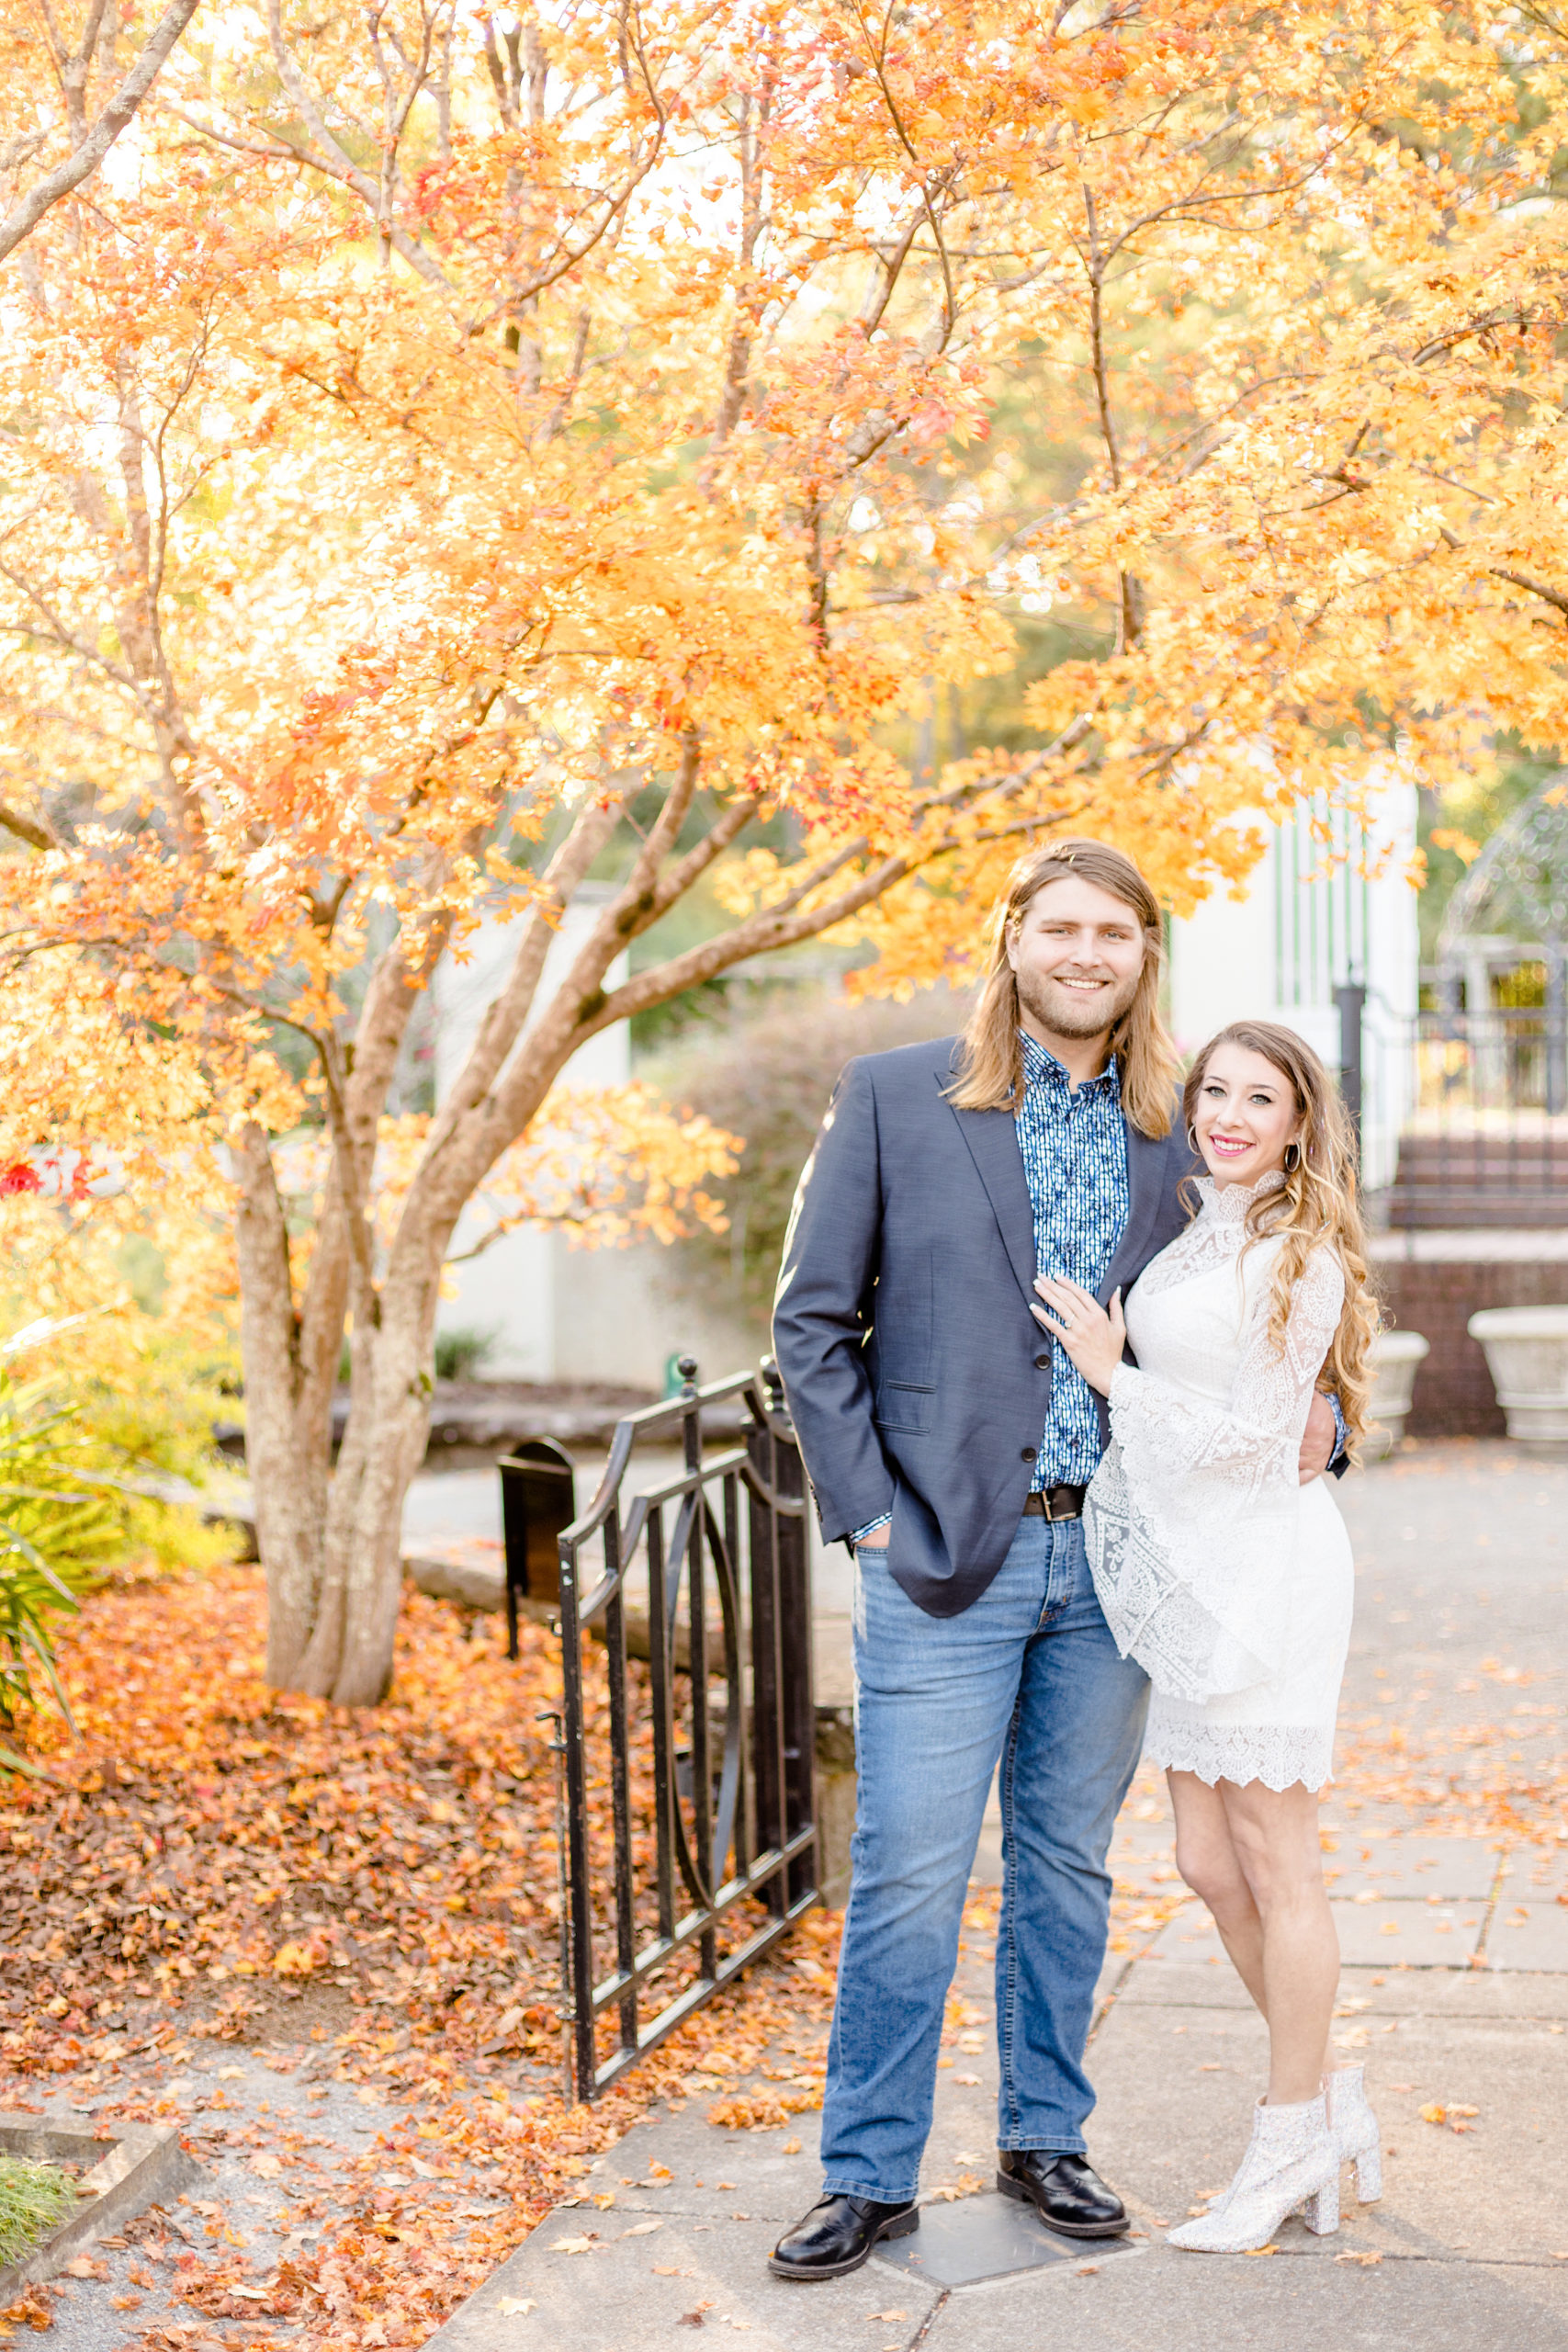 Rebecca & Drew's Fall Engagement Session at the Birmingham Botanical Gardens in Birmingham, Alabama - Katie & Alec Photography